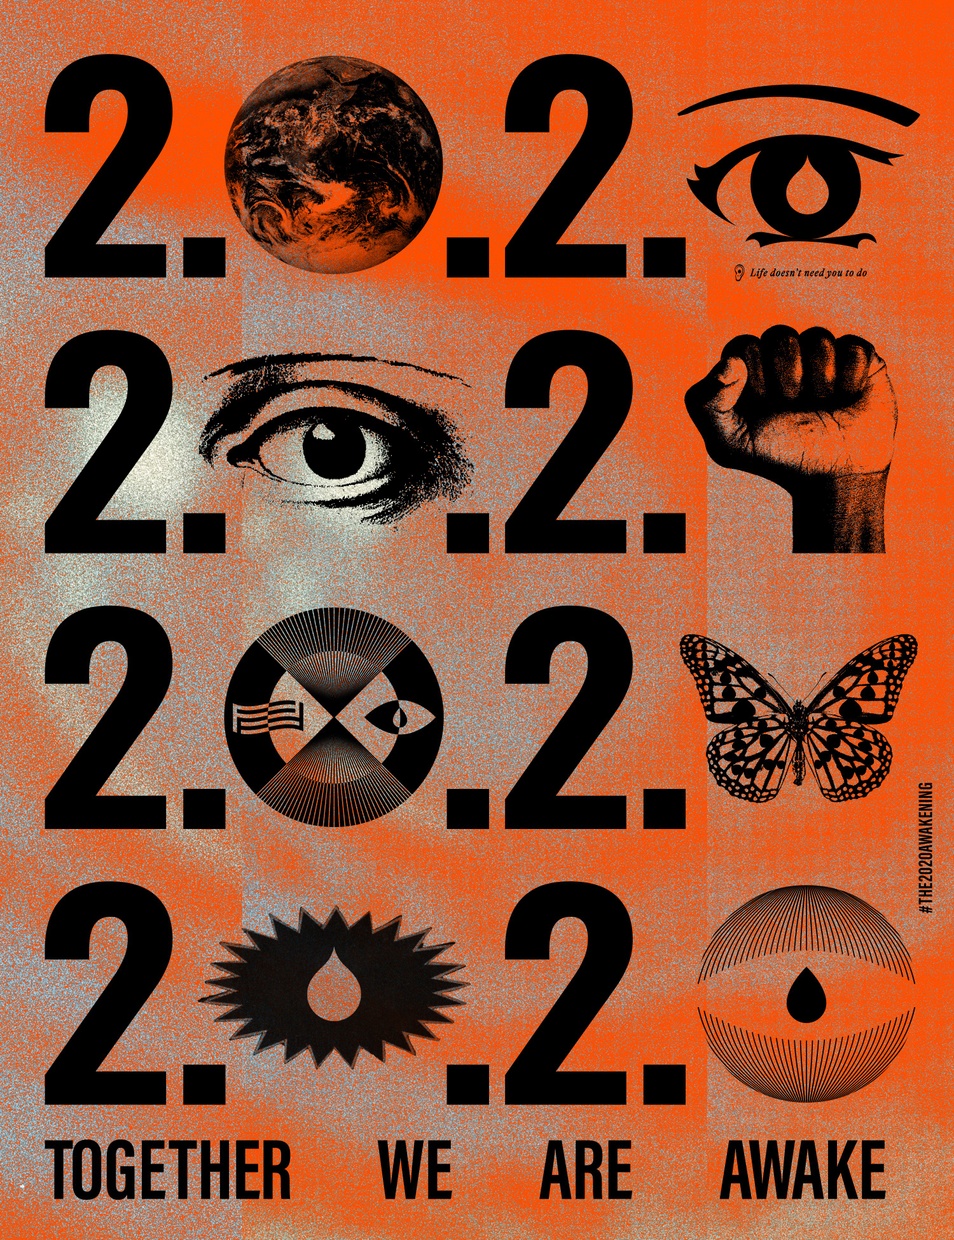 An orange poster with four rows of “2020” running horizontally, each uses different images in place of the “0” including a globe, an eye, a fist, a butterfly. Along the bottom “Together We Are Awake.”